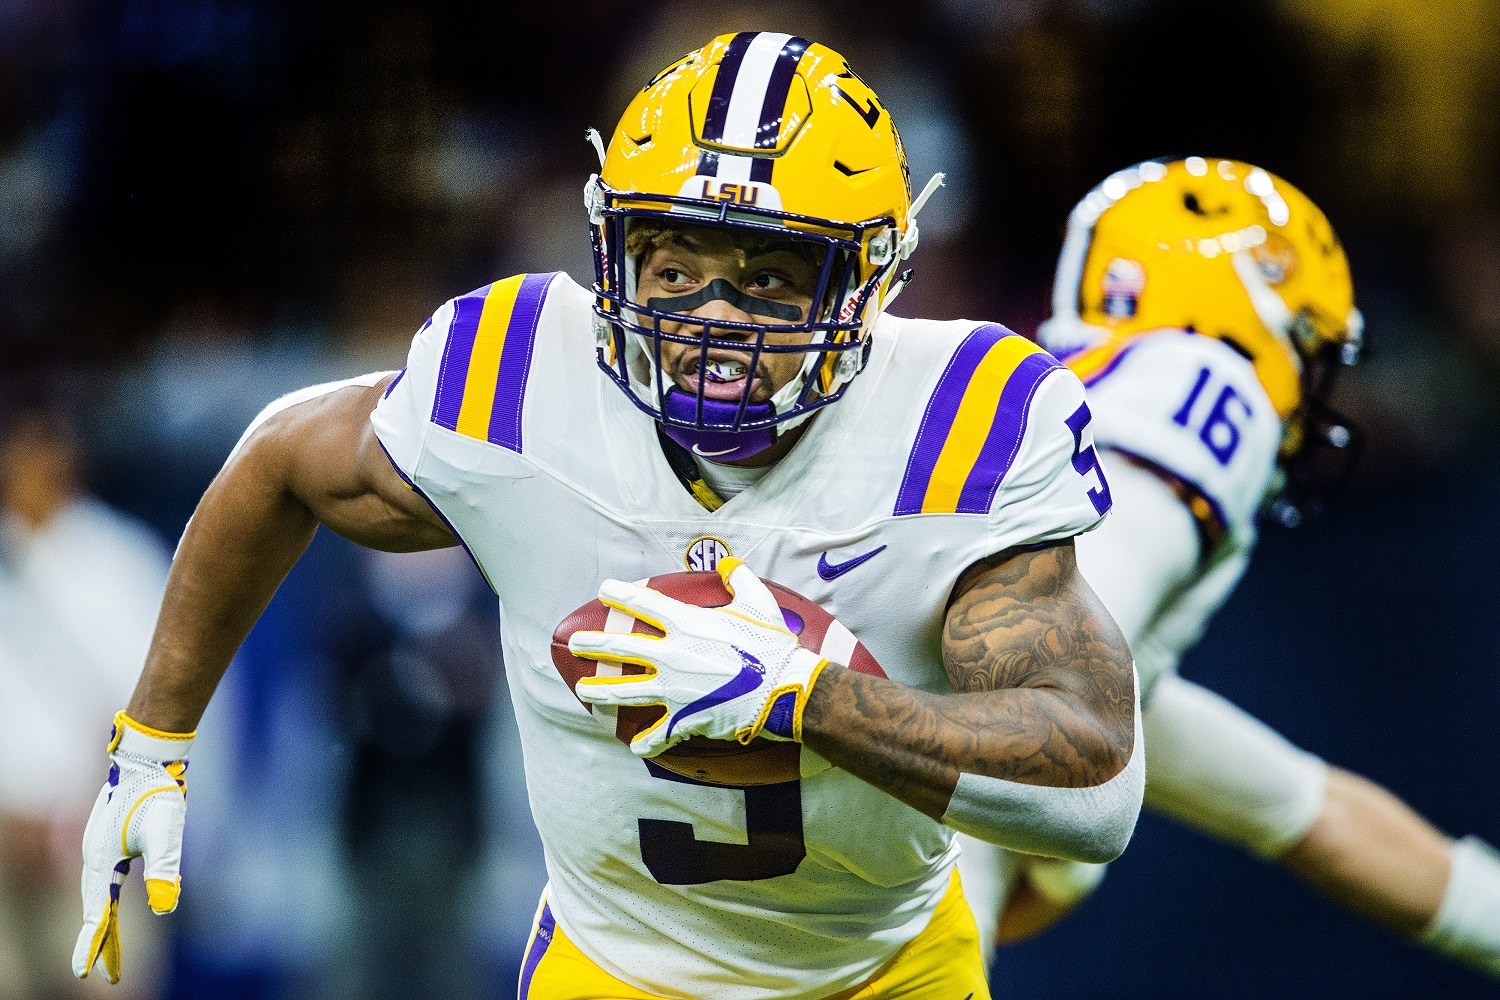 Running back Derrius Guice's accomplishments have been stripped from the revised LSU record book.